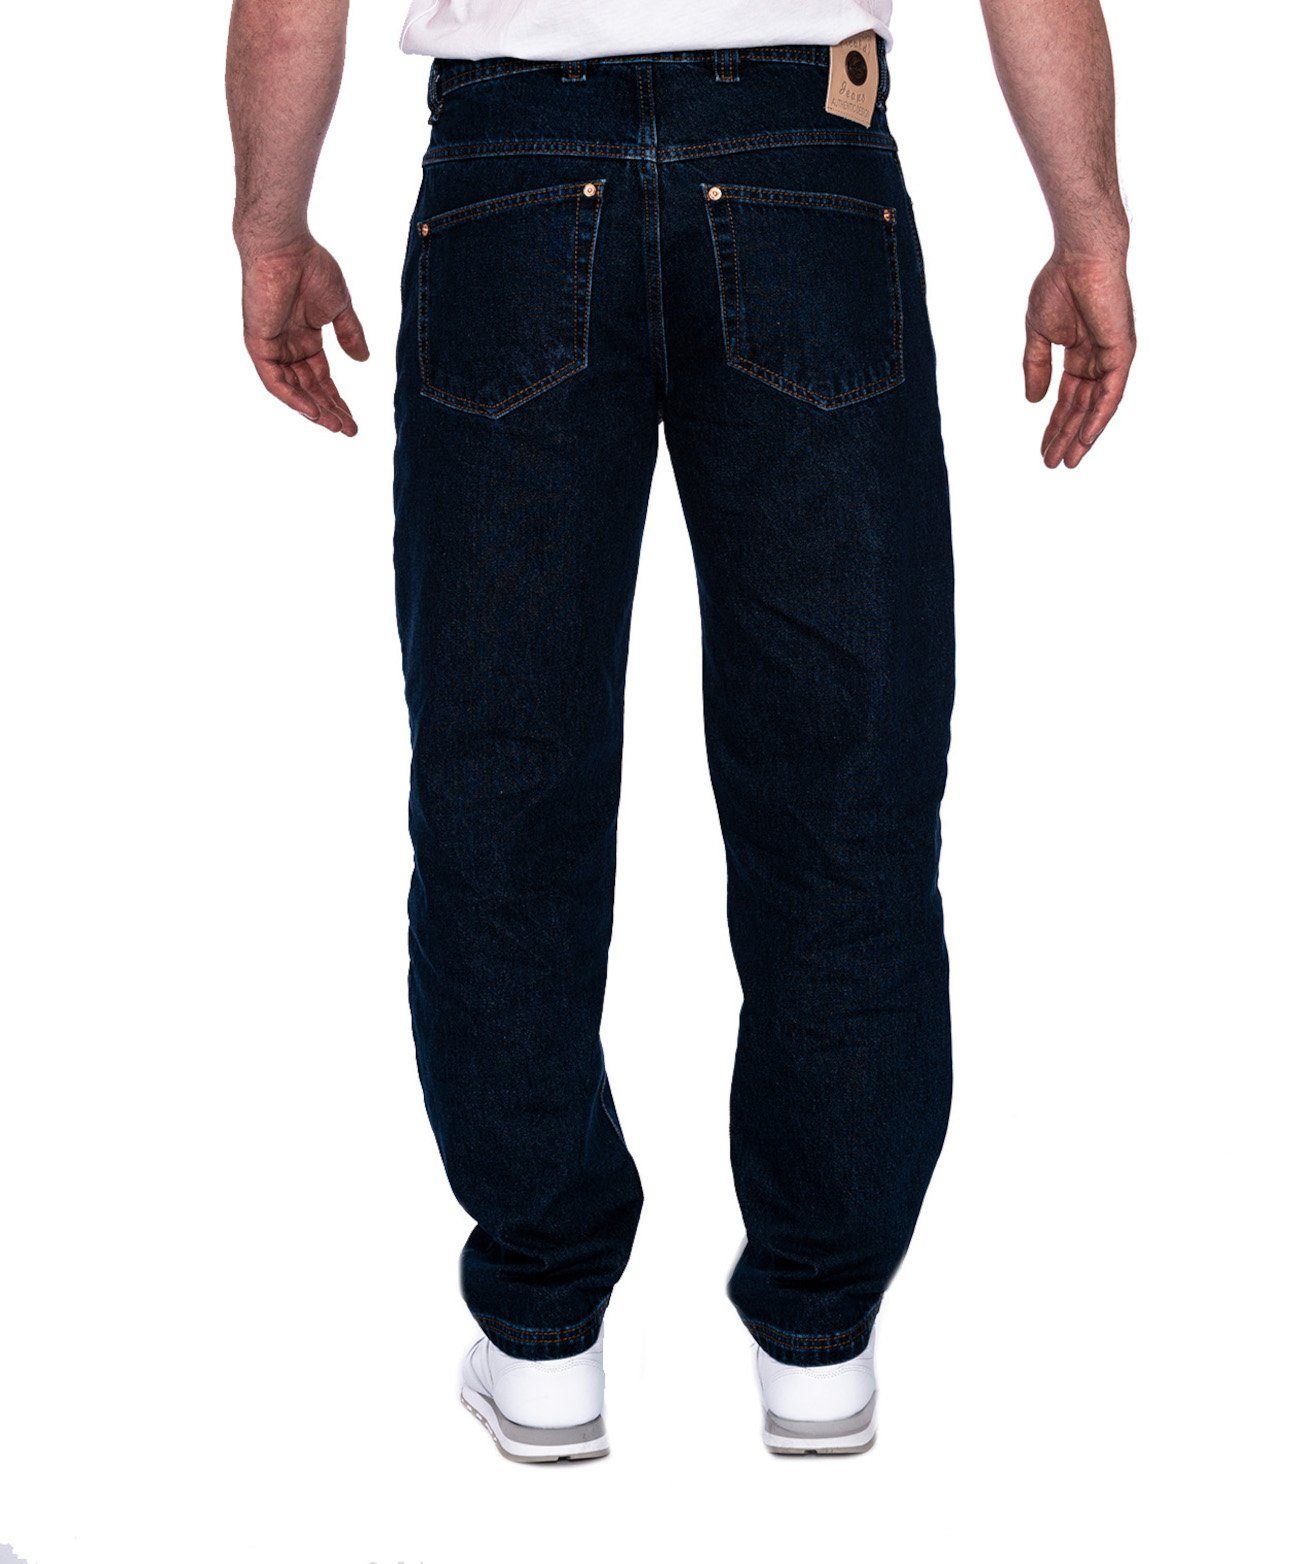 PICALDI Jeans Weite Jeans El Relaxed Fit, Loose Patron Zicco 472 Fit